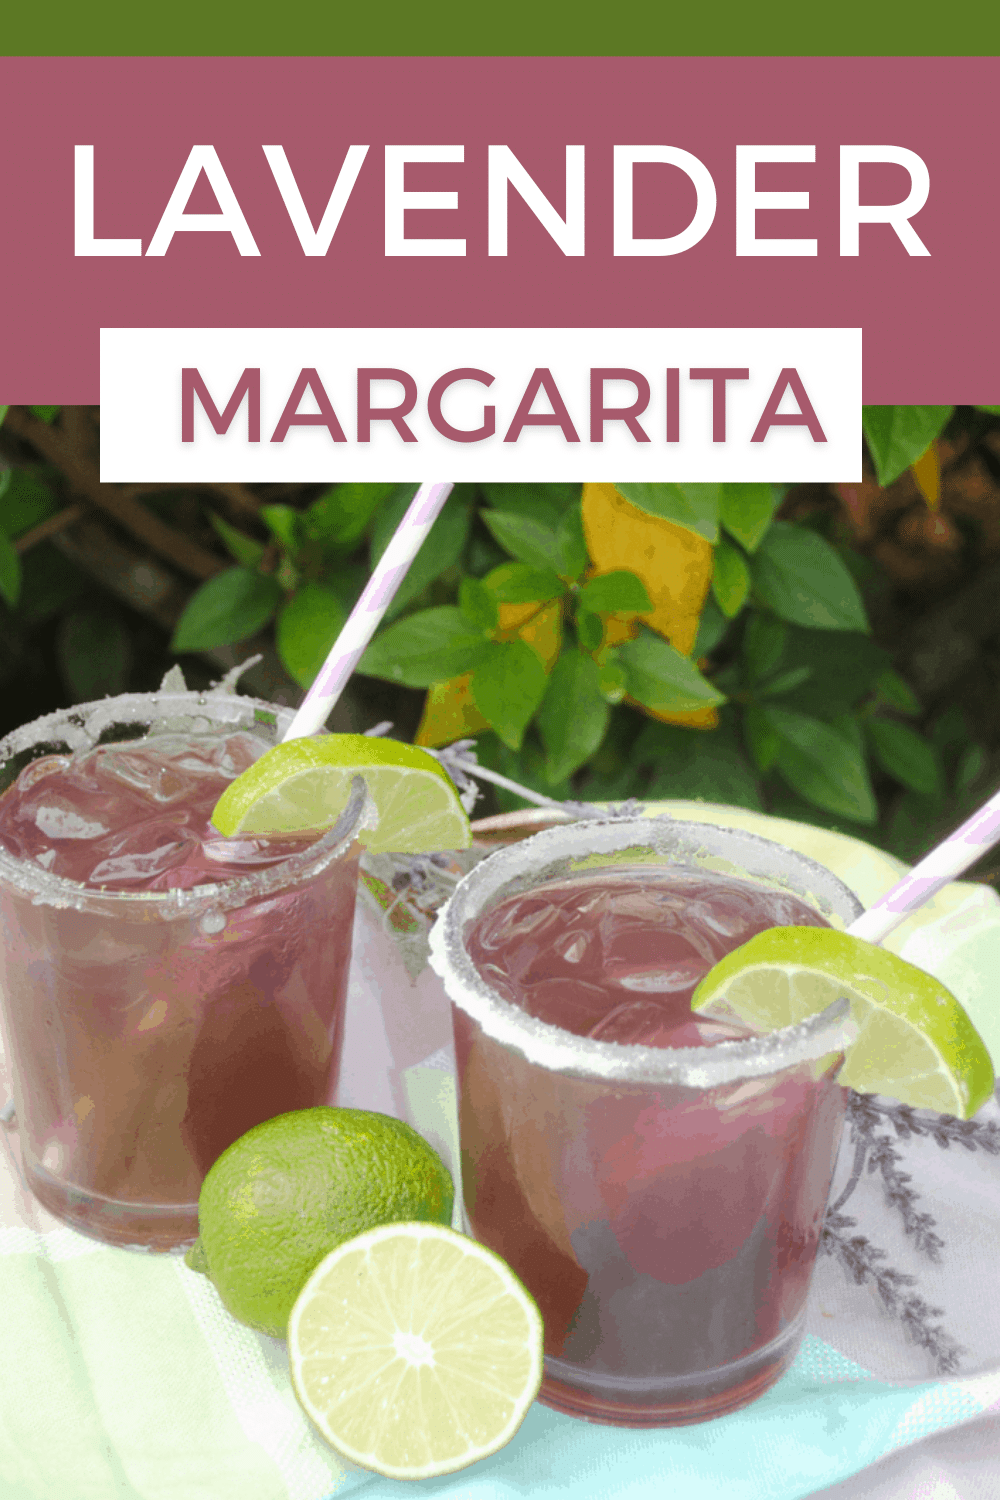 This Lavender Margarita is a sweet drink made with a few simple ingredients. It's a unique and refreshing cocktail perfect for Cinco de Mayo. #lavendermargarita #cocktails #margaritas #lavendermargaritarecipe #lavender via @wondermomwannab